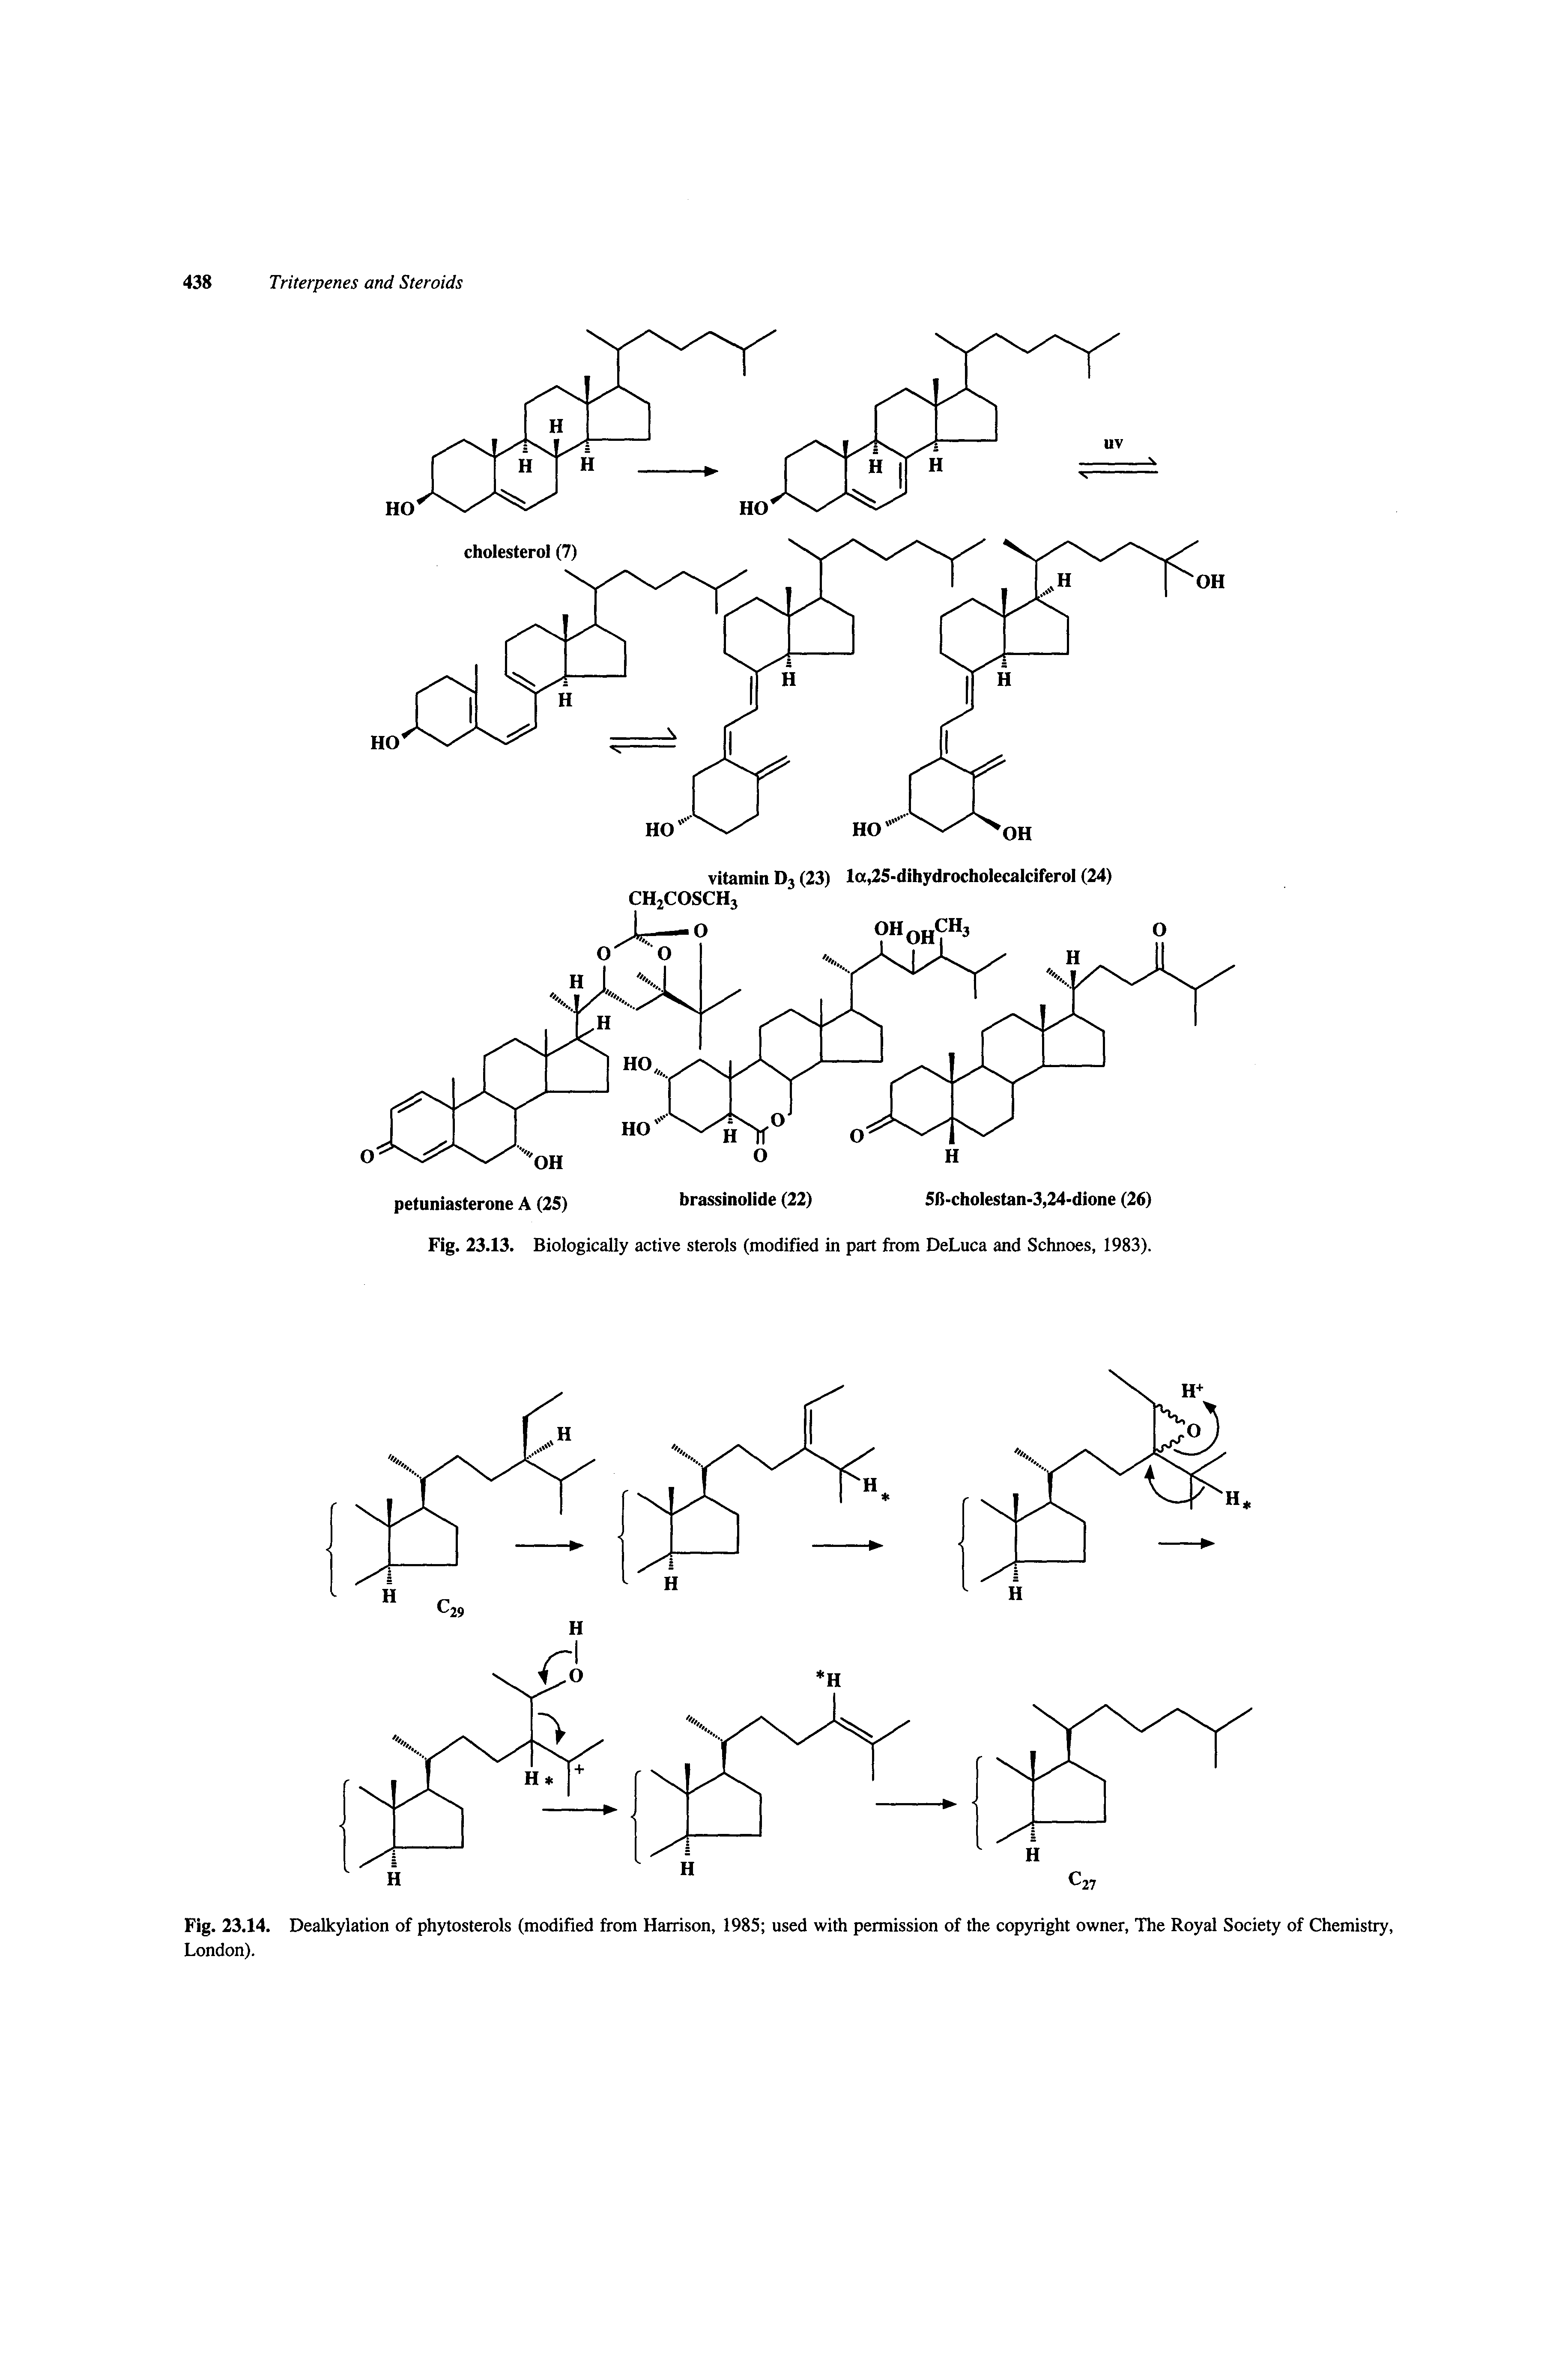 Fig. 23.14. Dealkylation of phytosterols (modified from Harrison, 1985 used with permission of the copyright owner, The Royal Society of Chemistry, London).